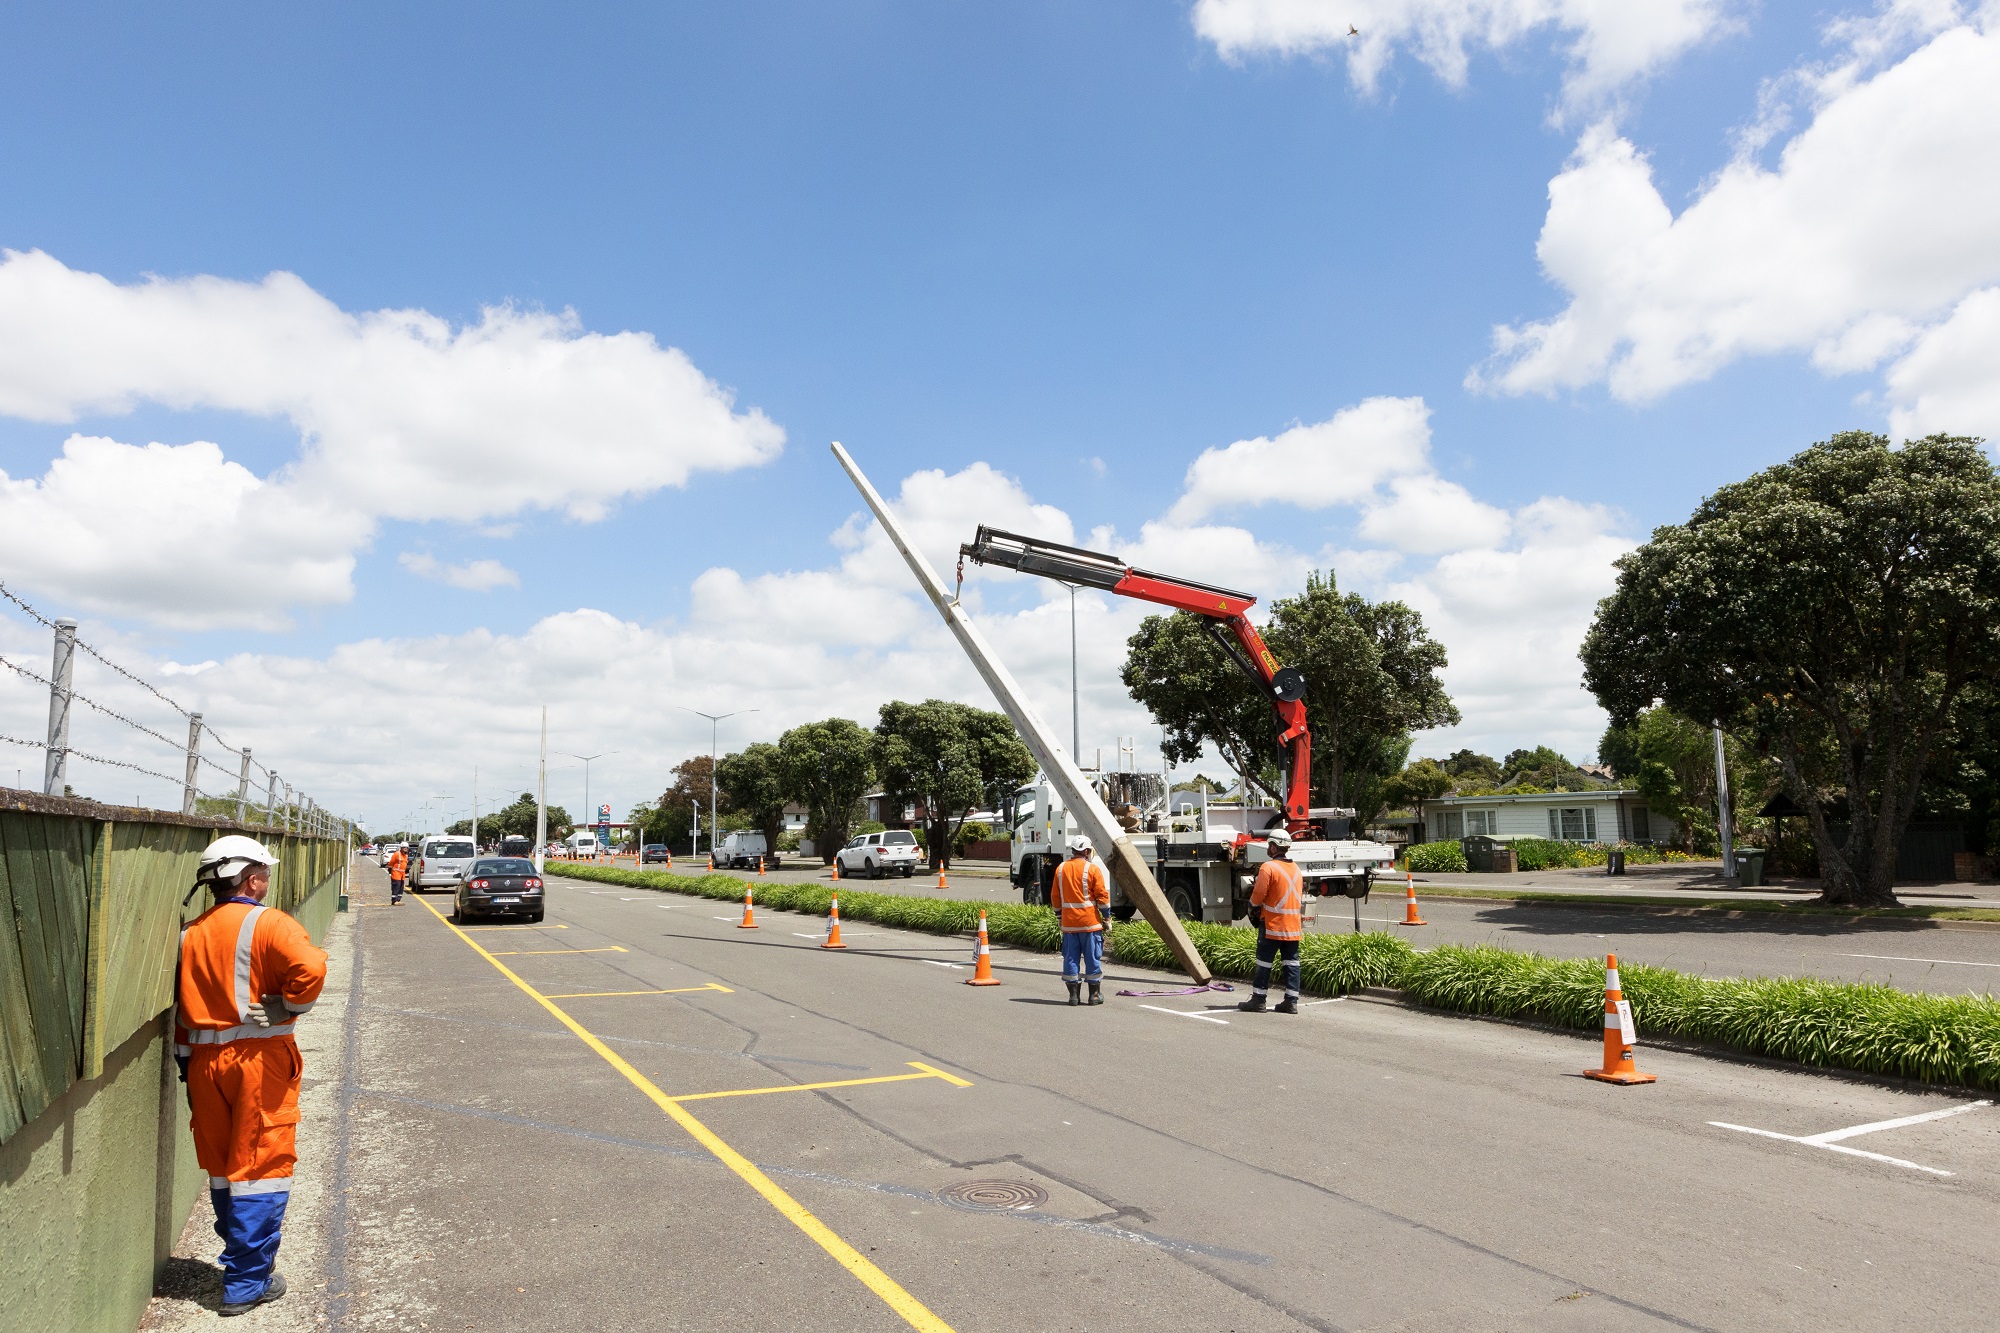 A hyab truck and workman bringing down a concrete power pole to the road.